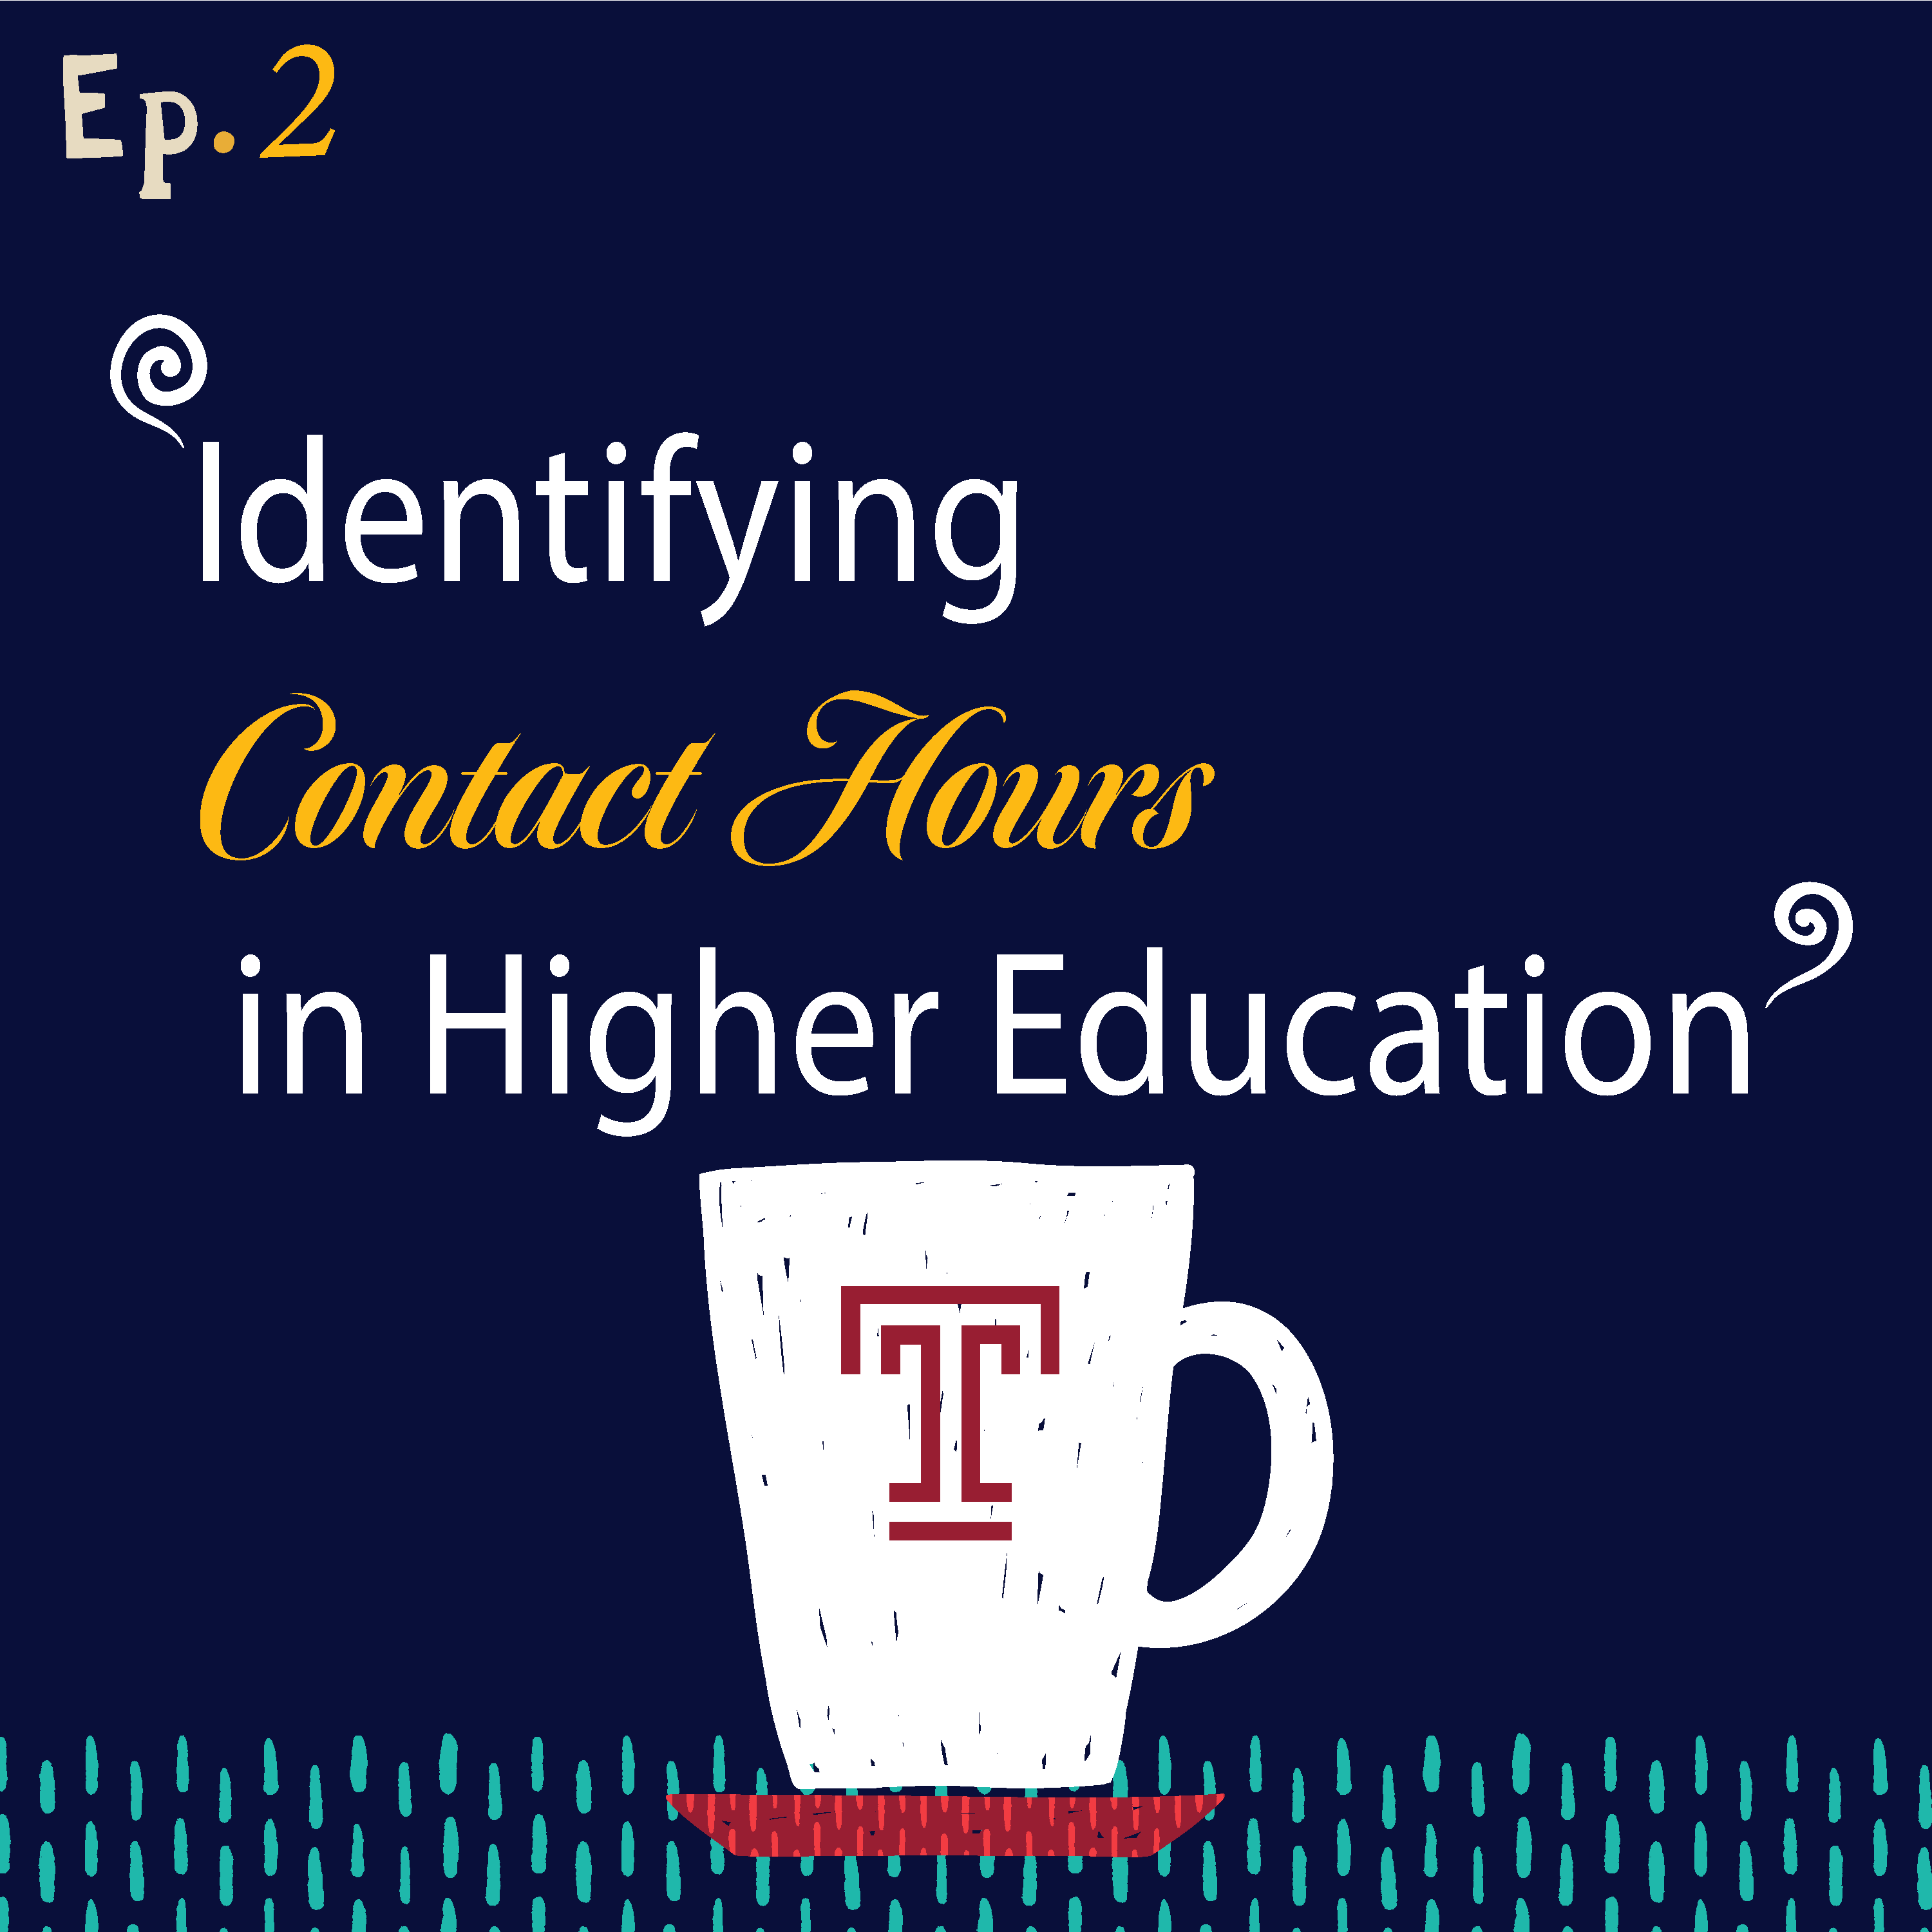 Identifying Contact Hours in Higher Education